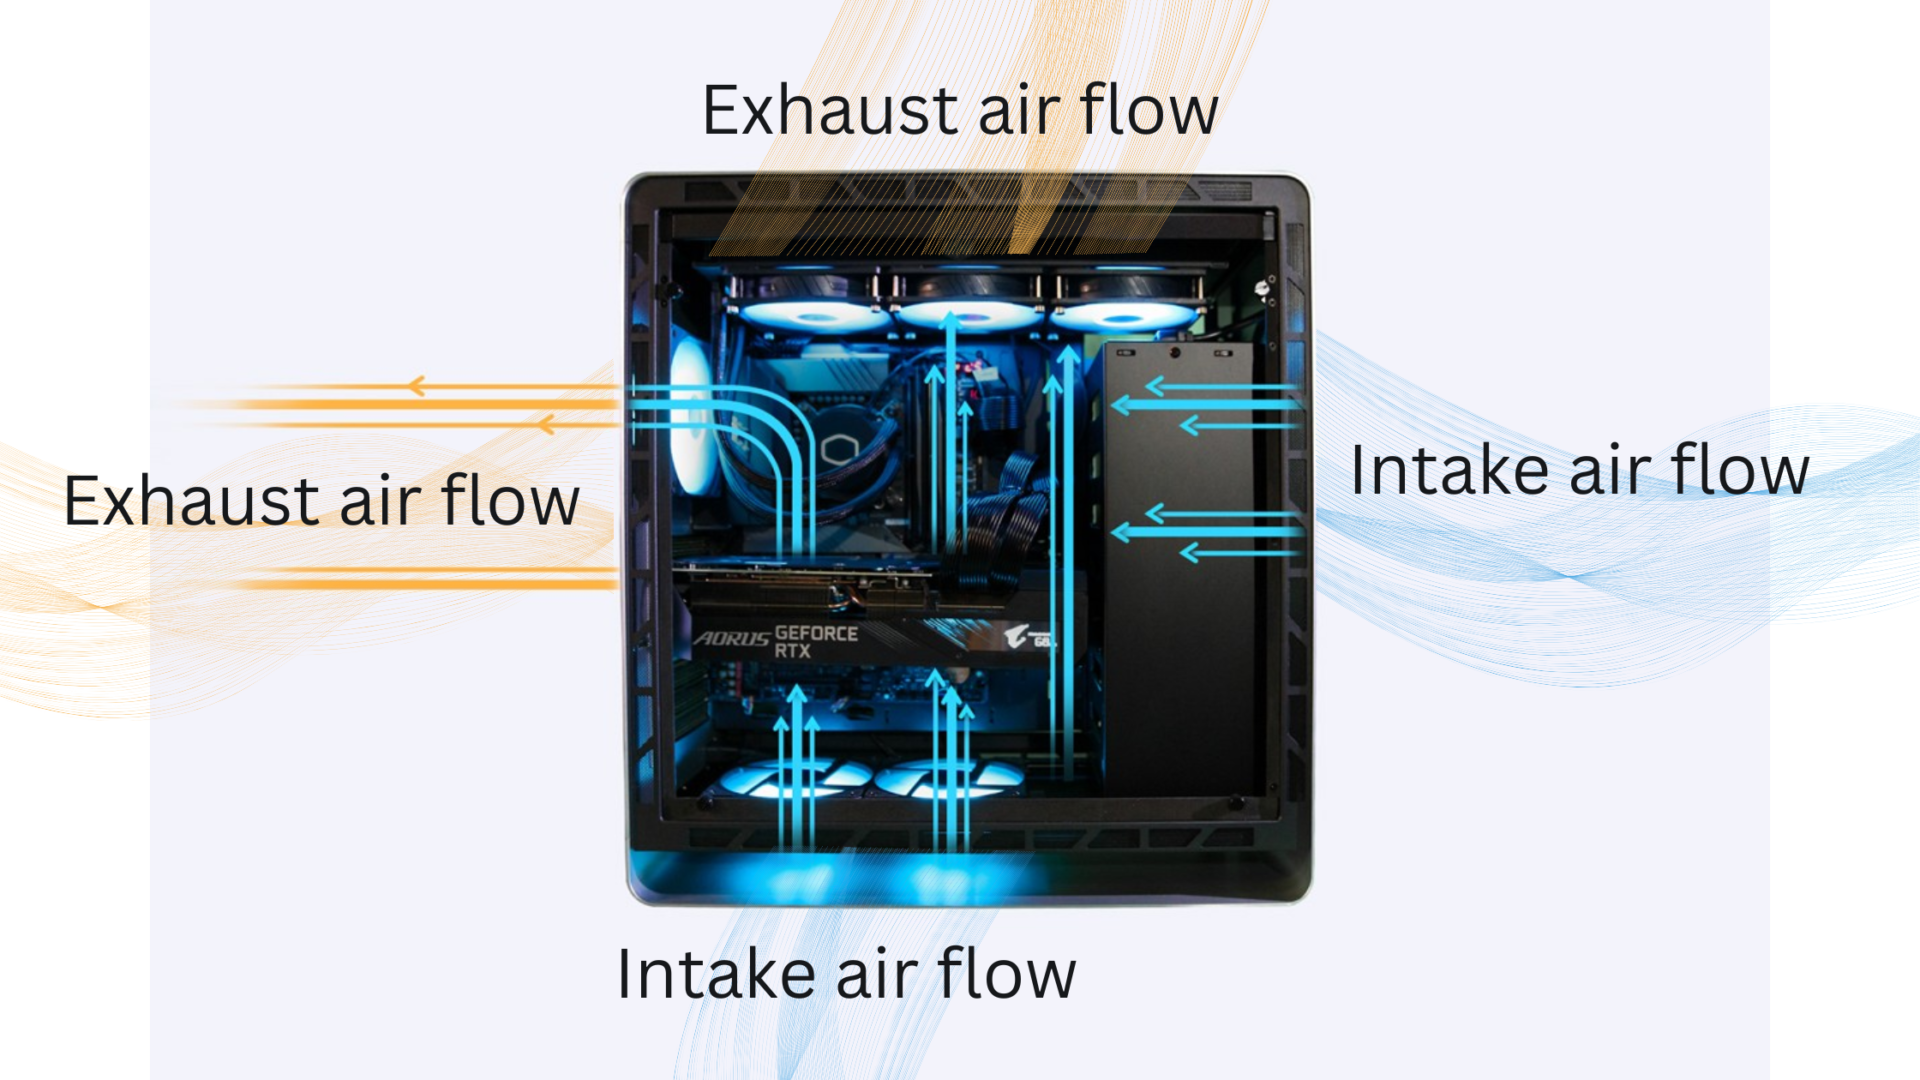 Ensure proper airflow around the computer by keeping it in a well-ventilated area.
Clean the internal cooling fans to prevent them from getting clogged with dust.